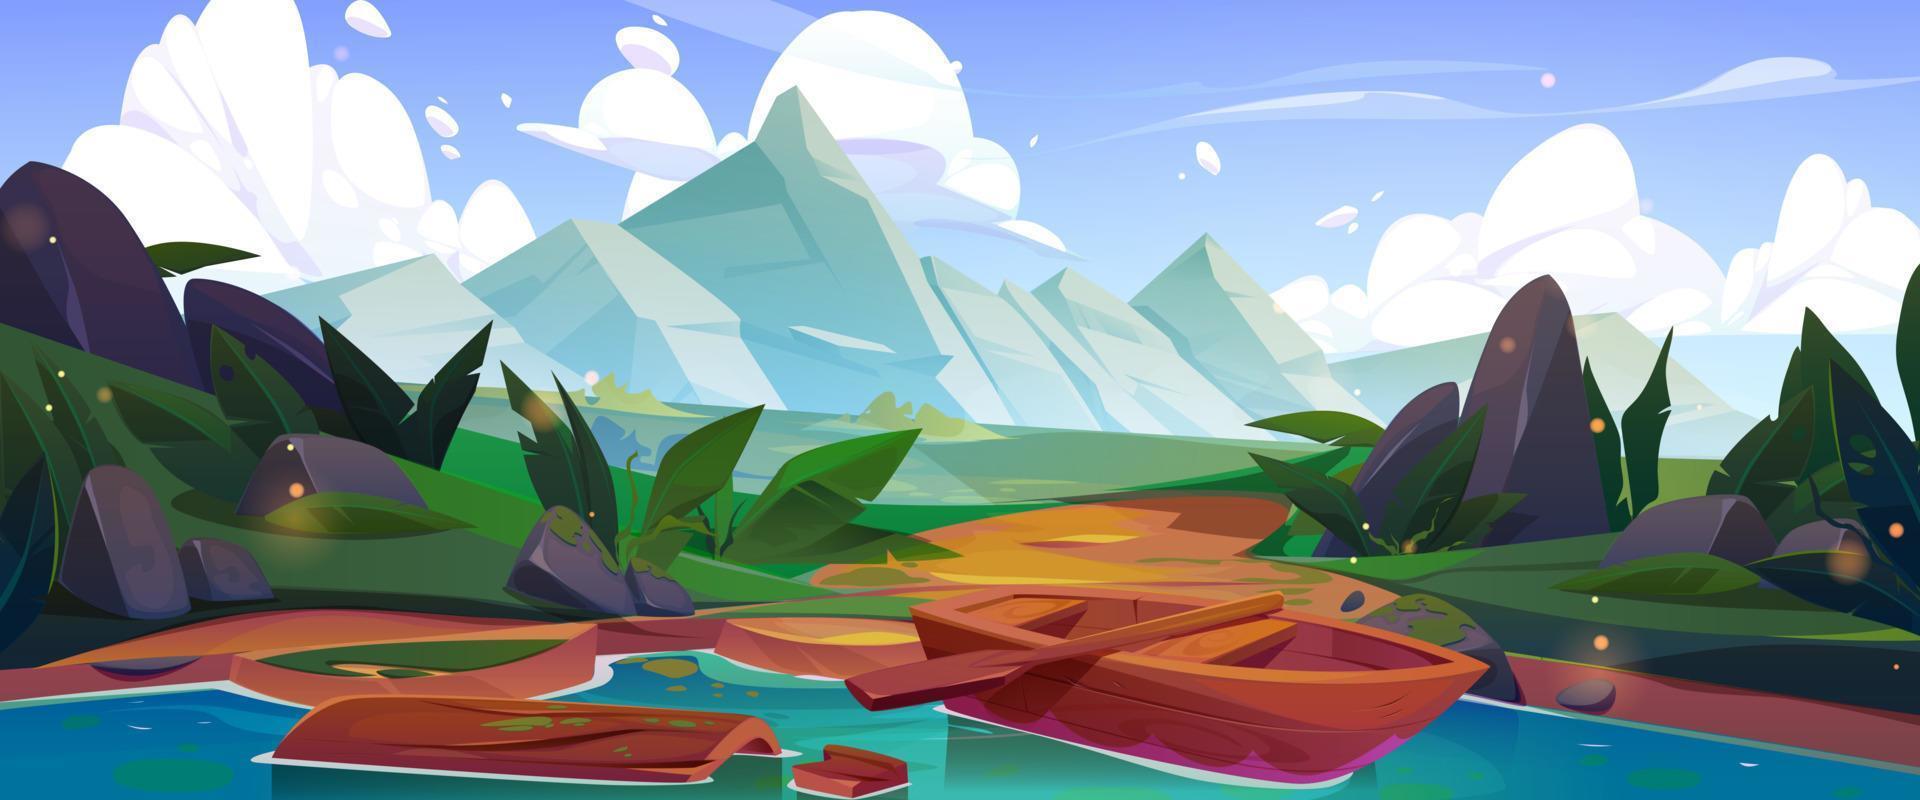 Mountain valley scene with lake and boat vector